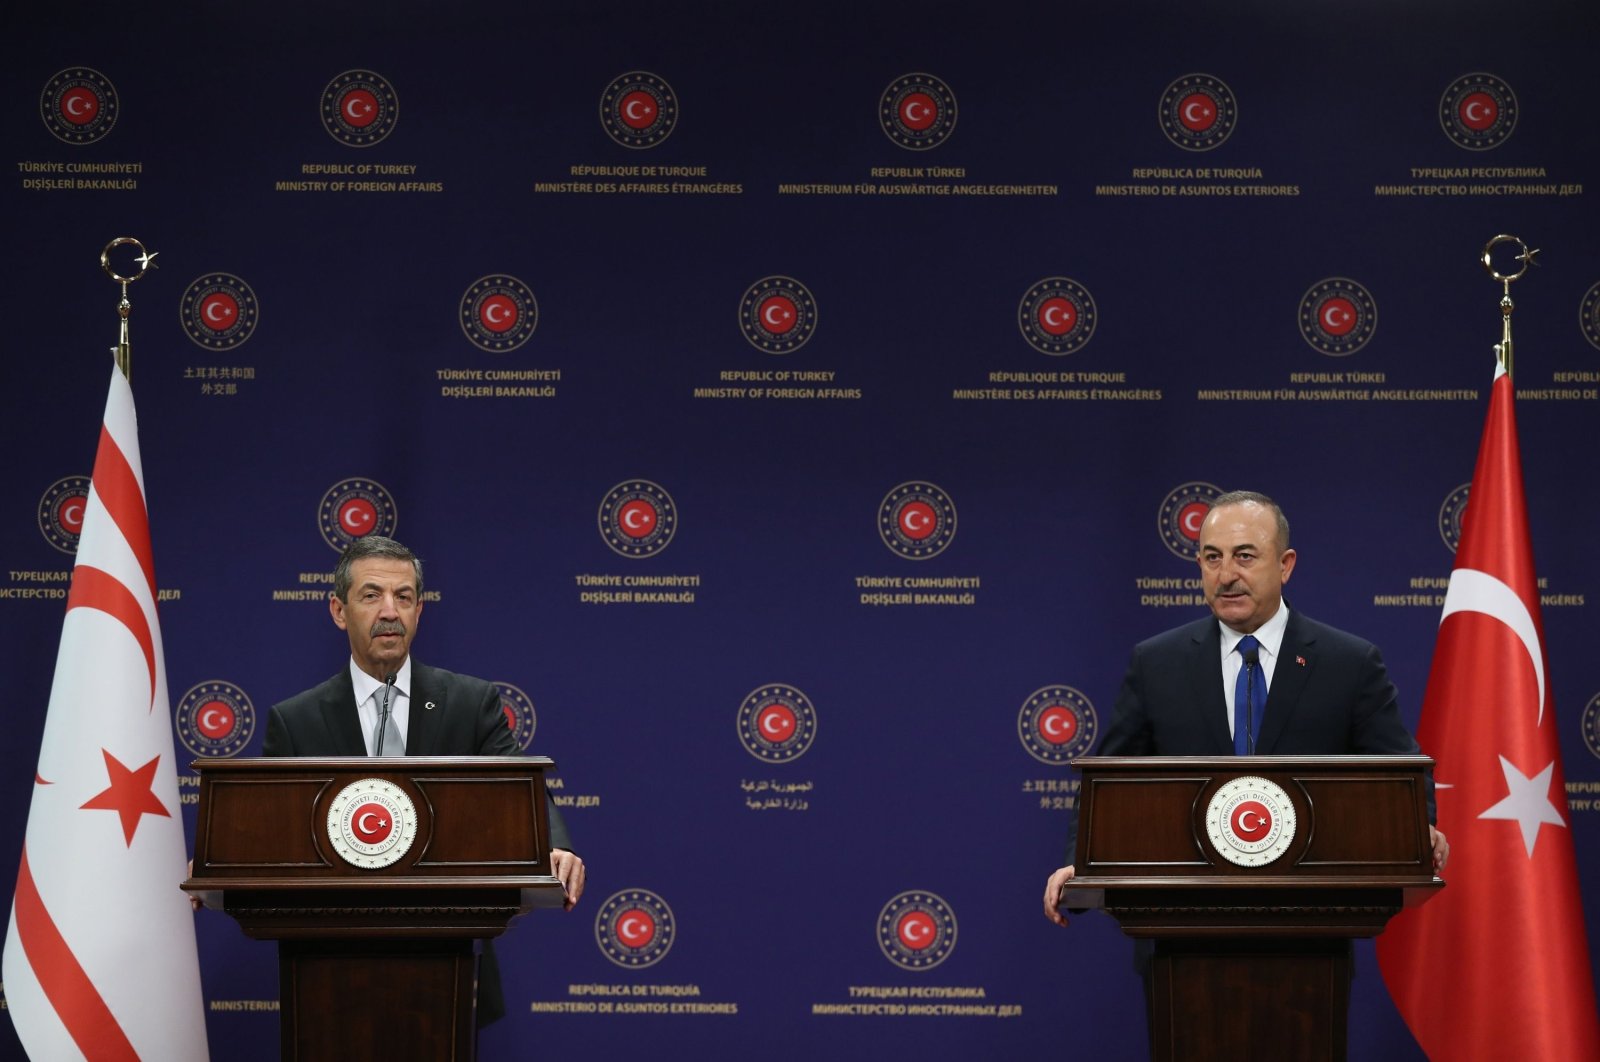 Turkish Cypriot Foreign Affairs Minister Tahsin Ertuğruloğlu (L) and Turkish Foreign Minister Mevlüt Çavuşoğlu hold a joint news conference after their meeting in Ankara, Turkey, Jan. 11, 2021. (AFP File Photo)